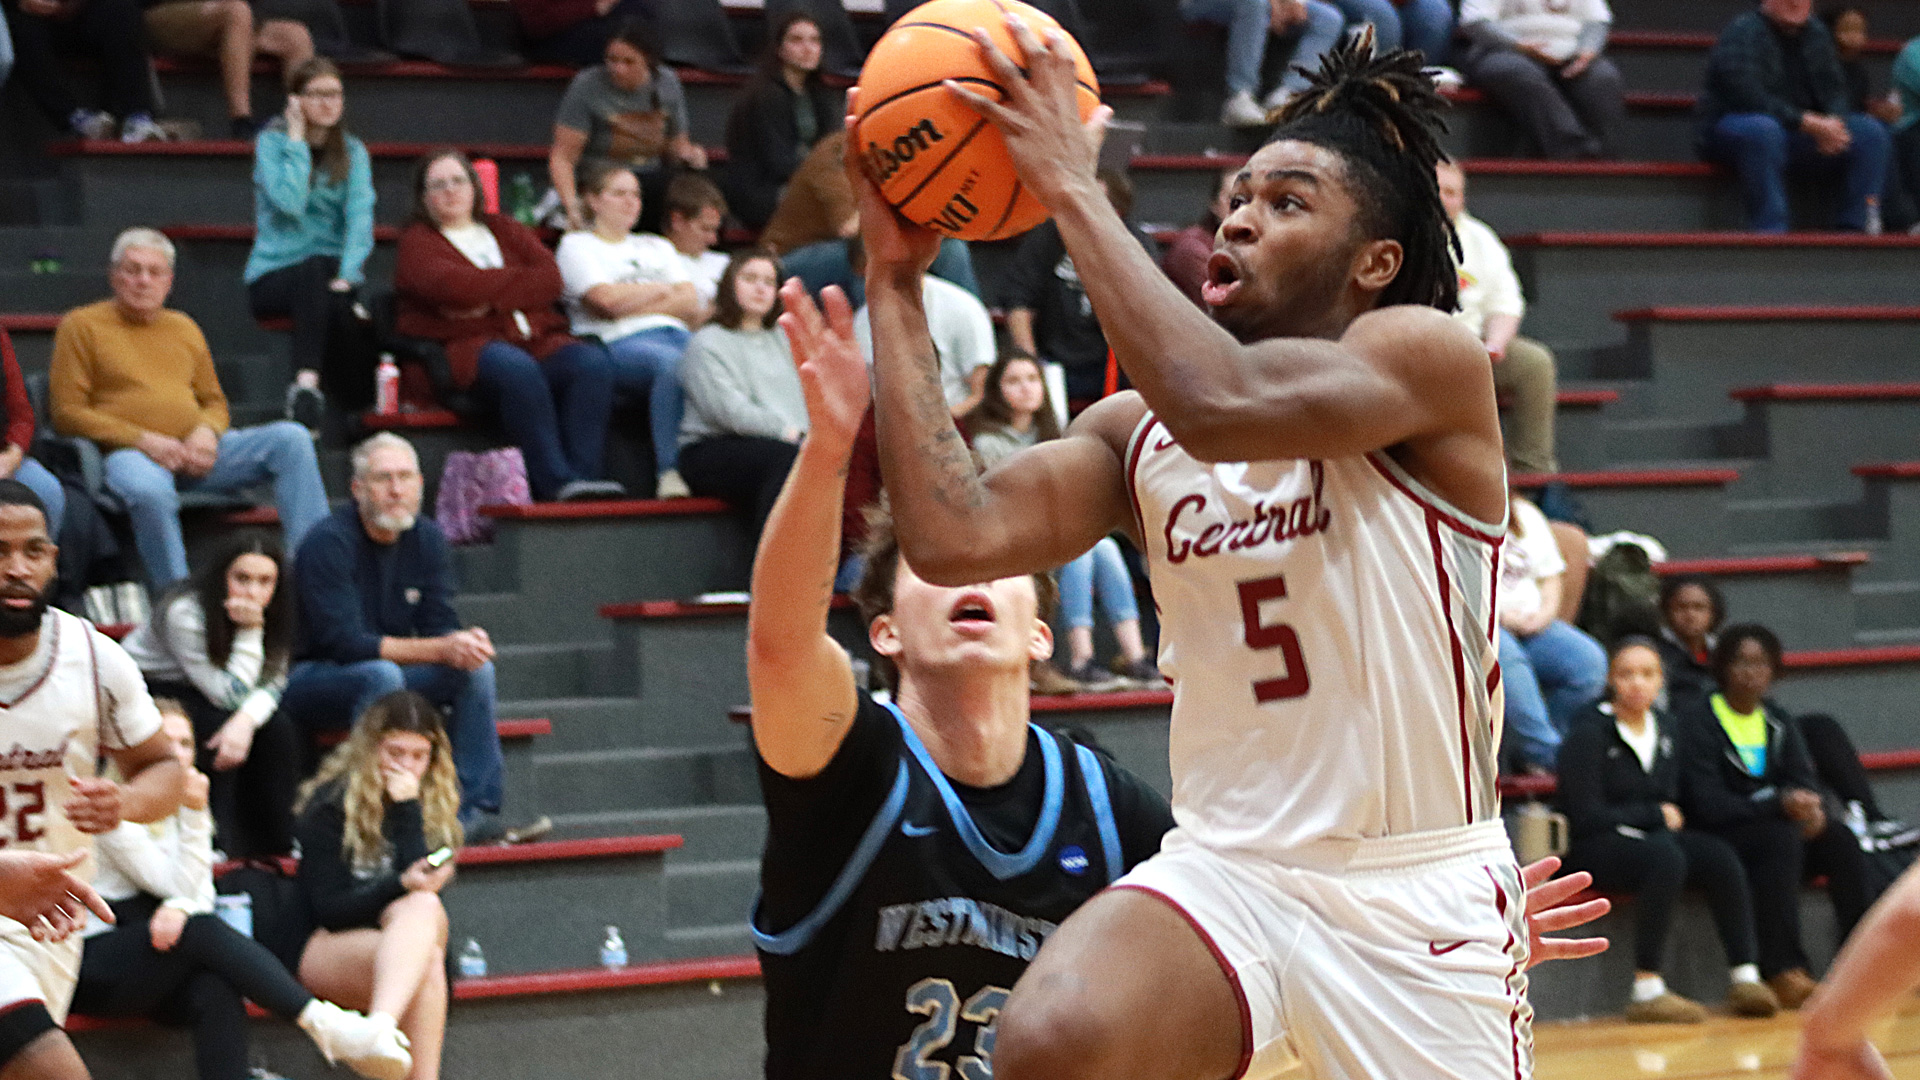 CCCB sophomore Raheem Brizendine leads the Saints in scoring at the break with an 18.4 points per game average.